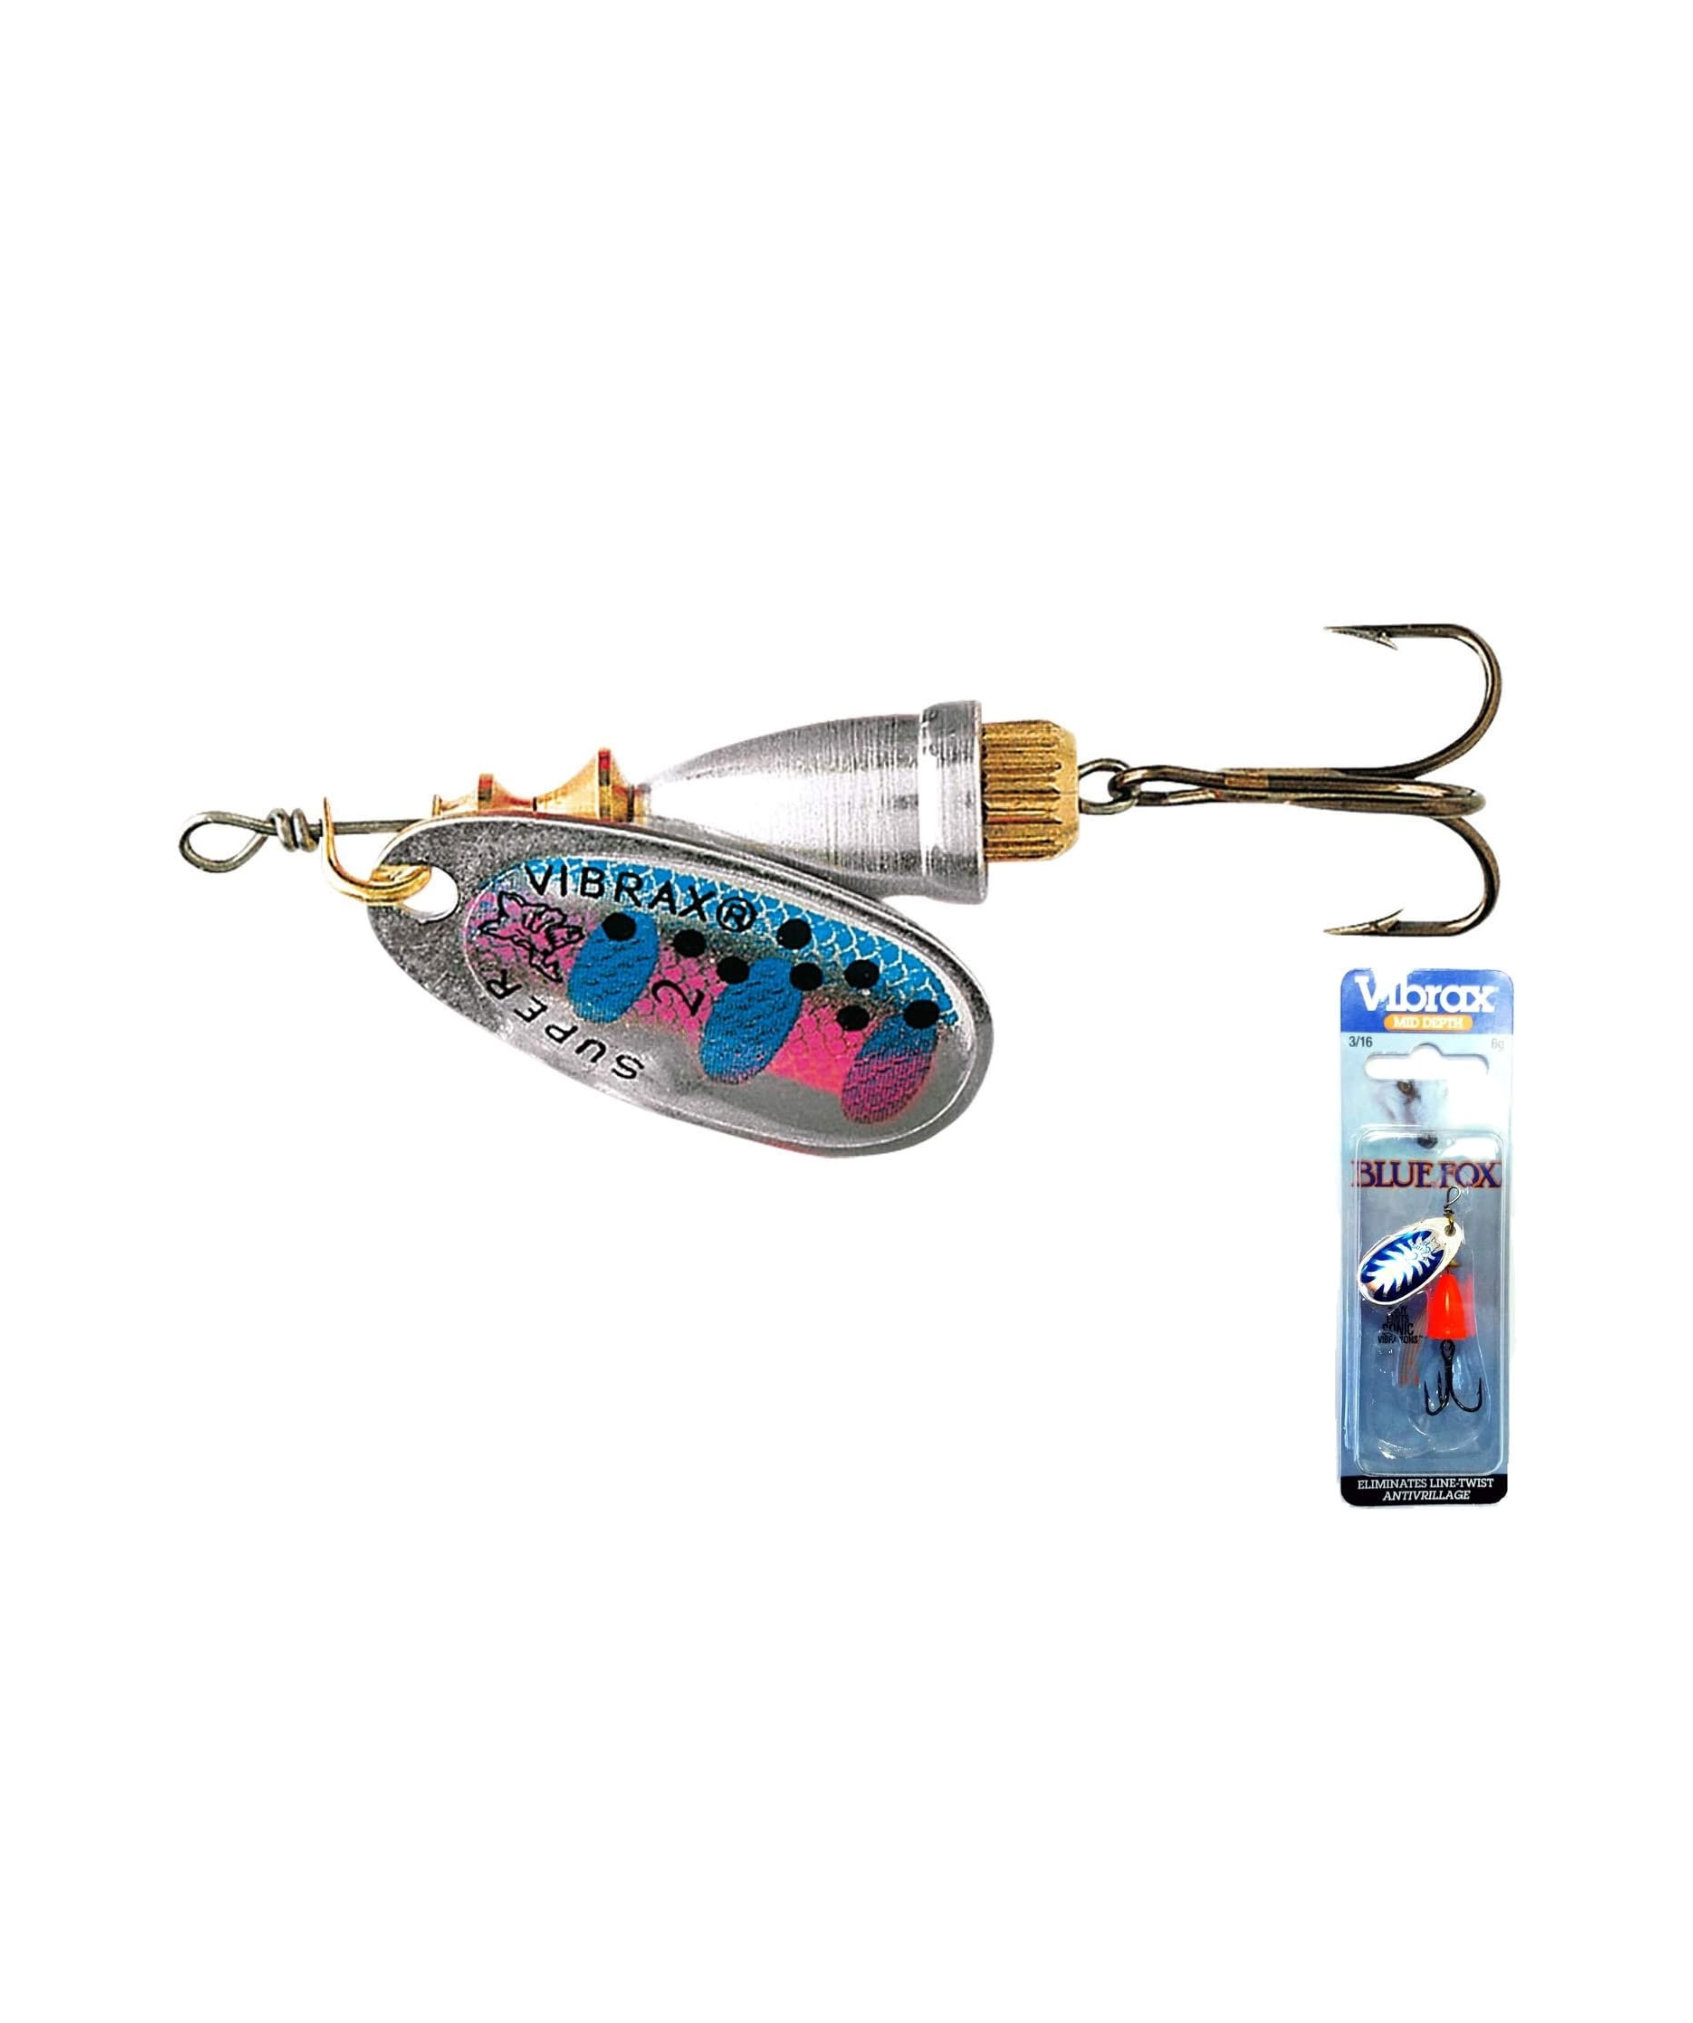 classic vibrax 04 painted 3/8 rainbow trout